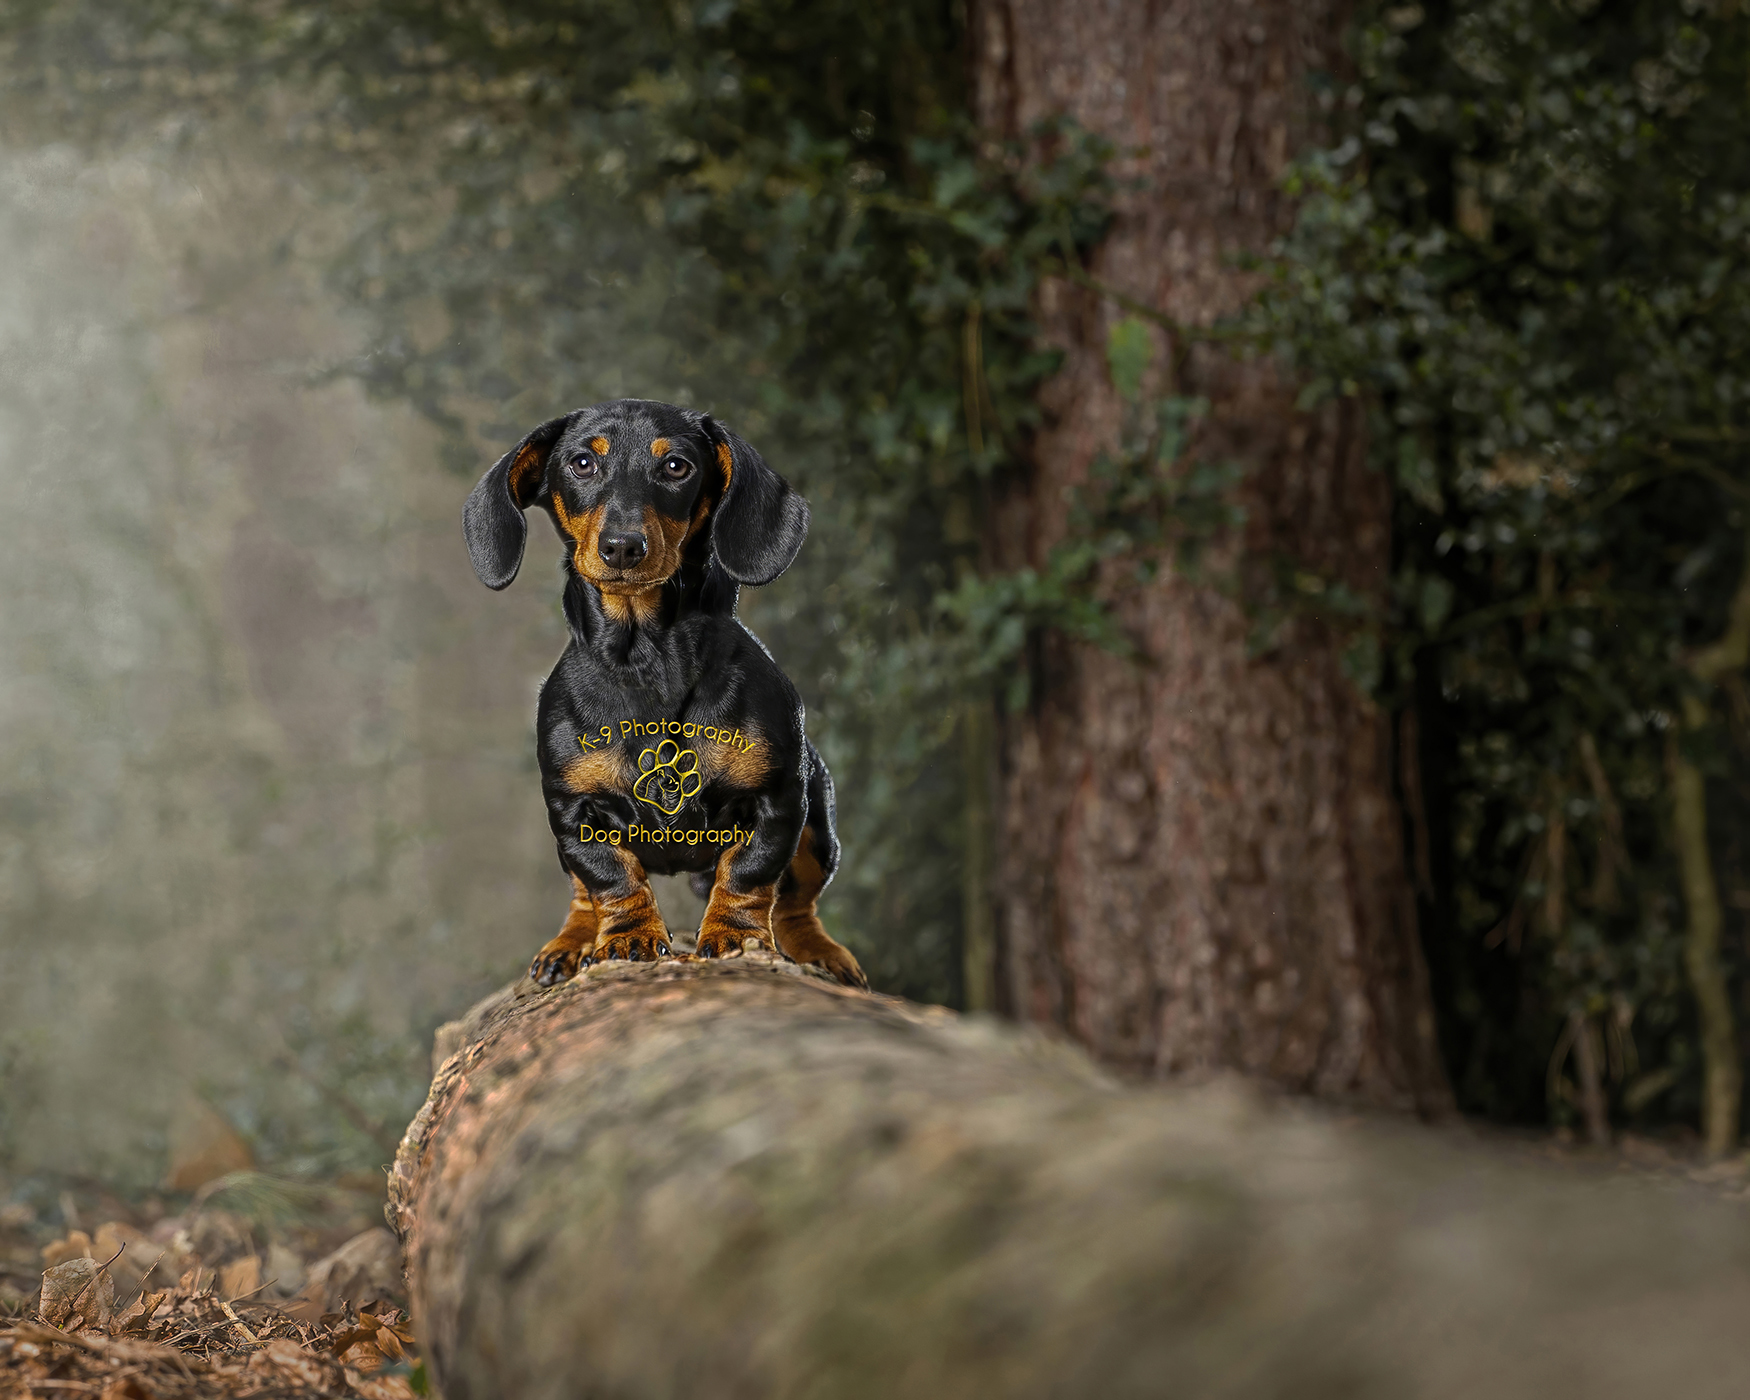 Sausage dog taken by Dog Photographer Adrian Bullers in Bedfordshire, UK